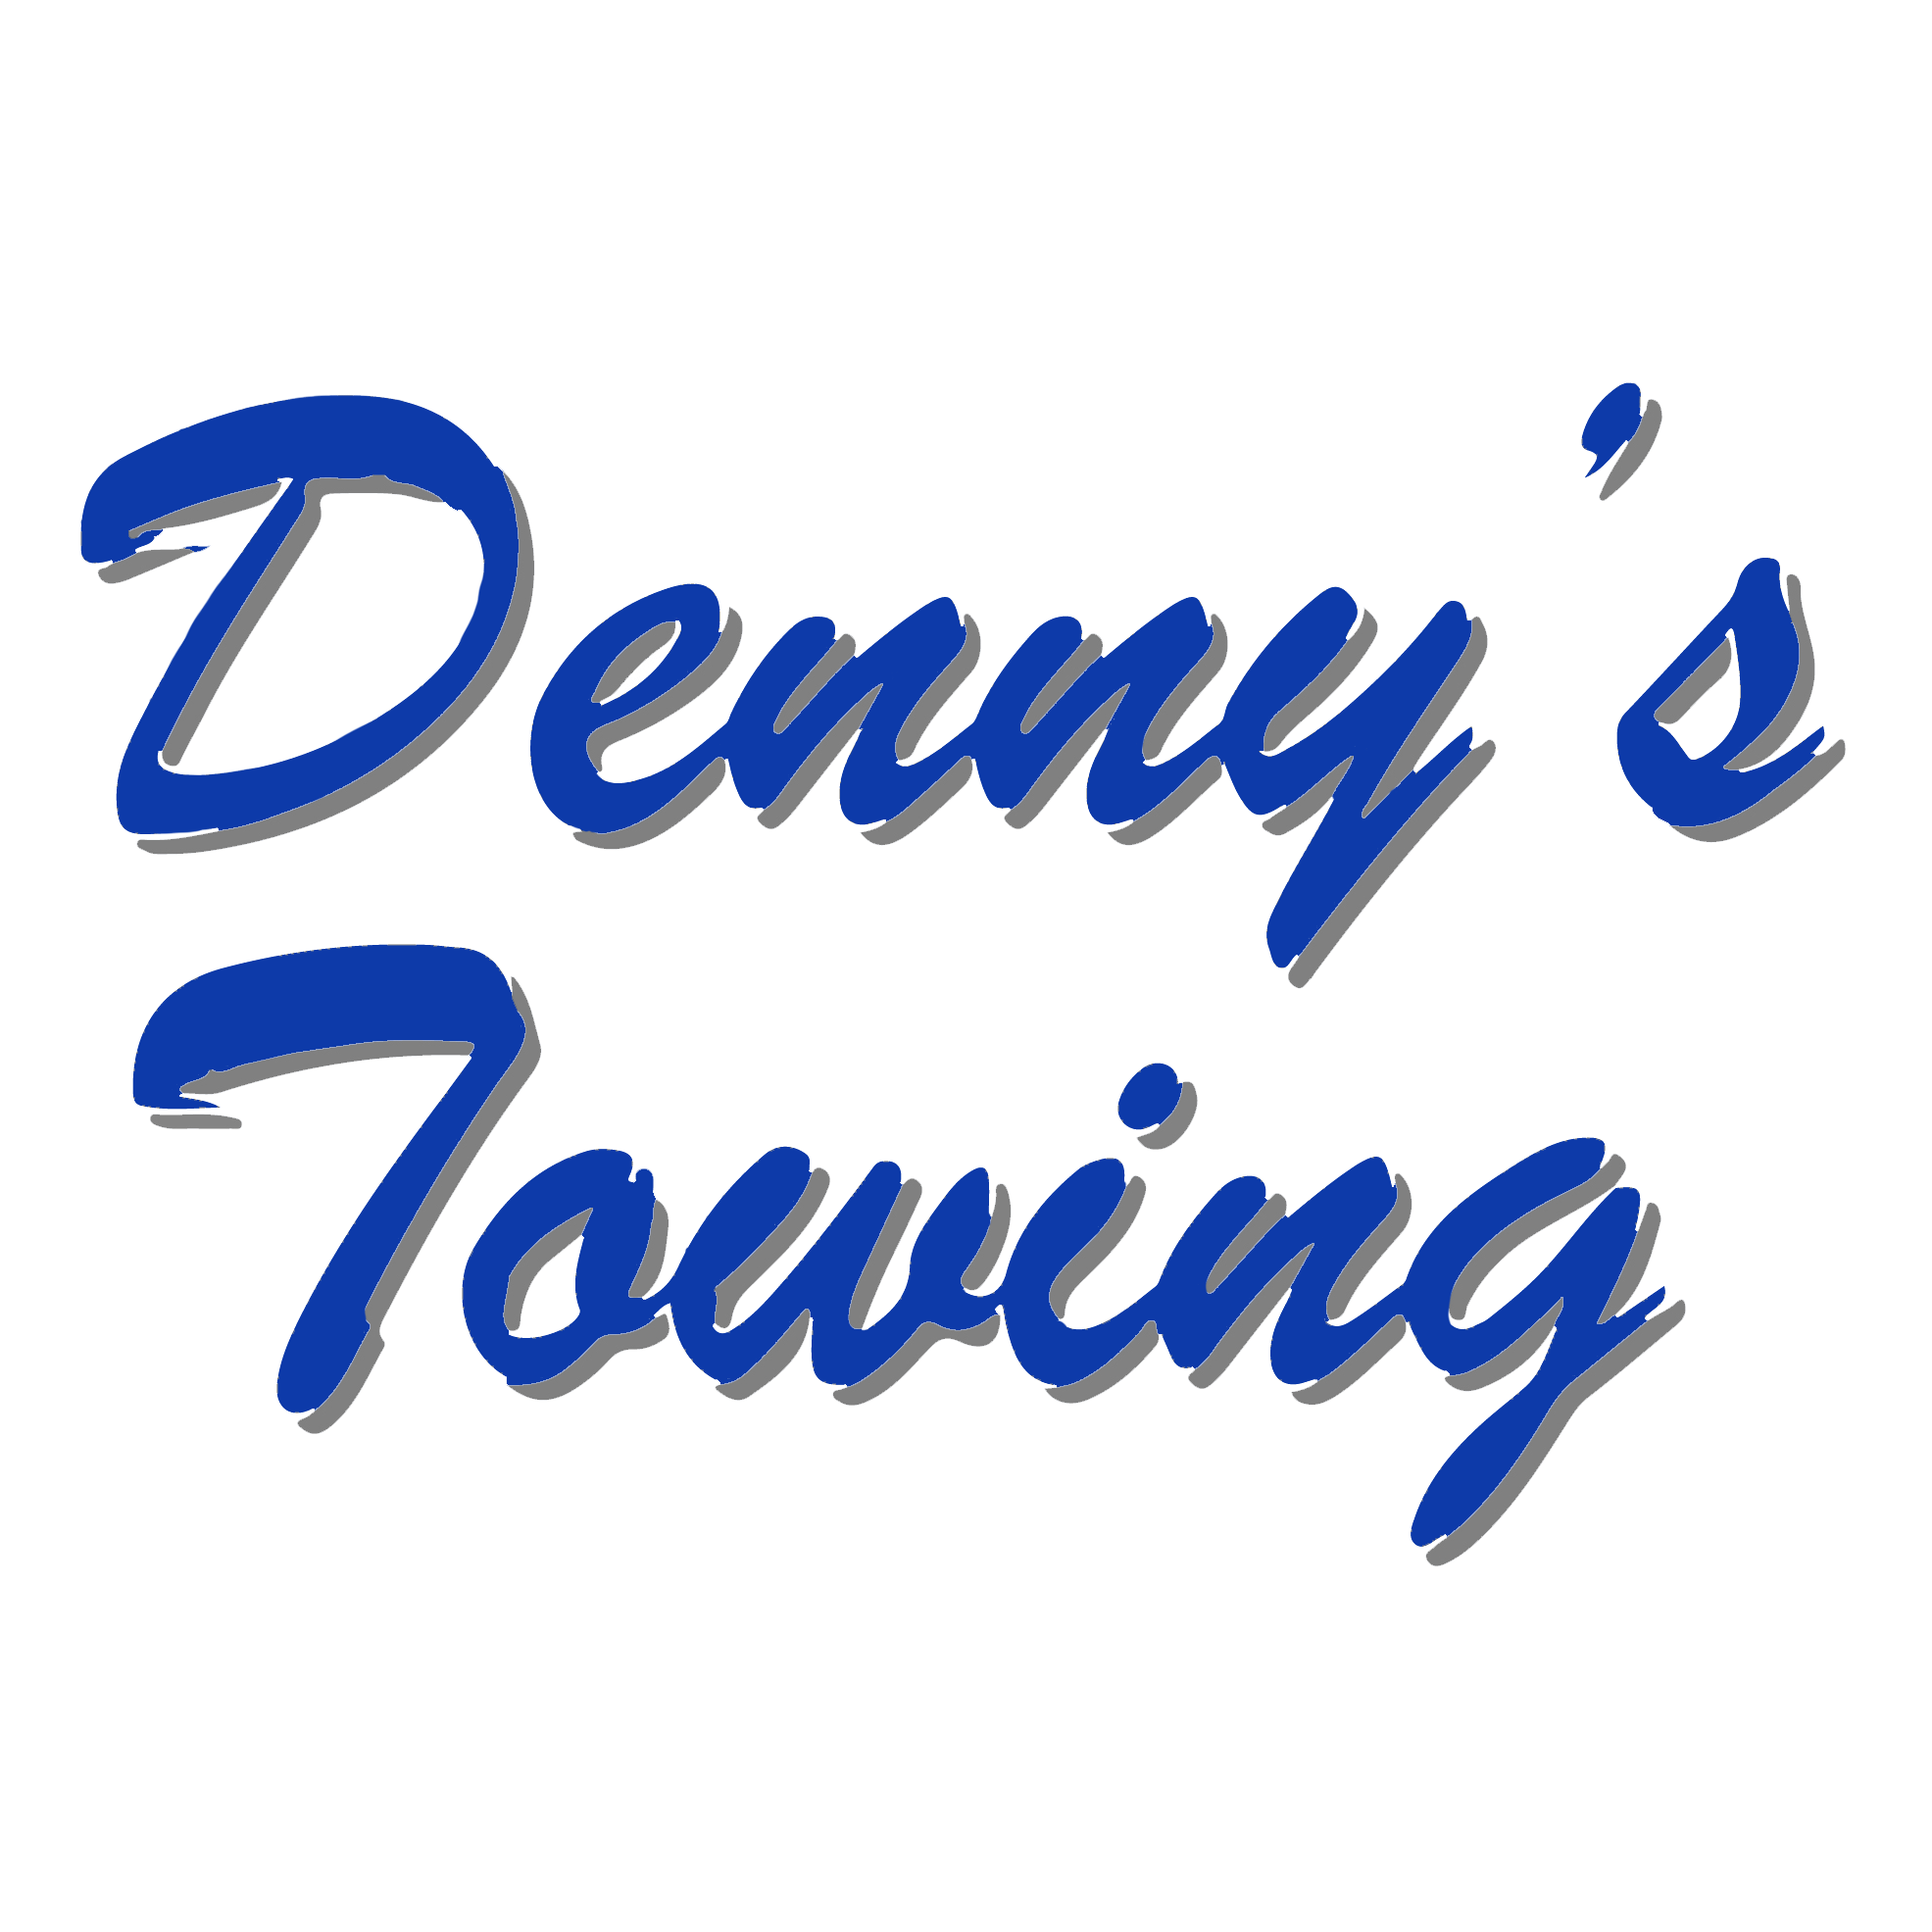 Denny's Towing - Fort Worth, TX 76119 - (817)461-2338 | ShowMeLocal.com